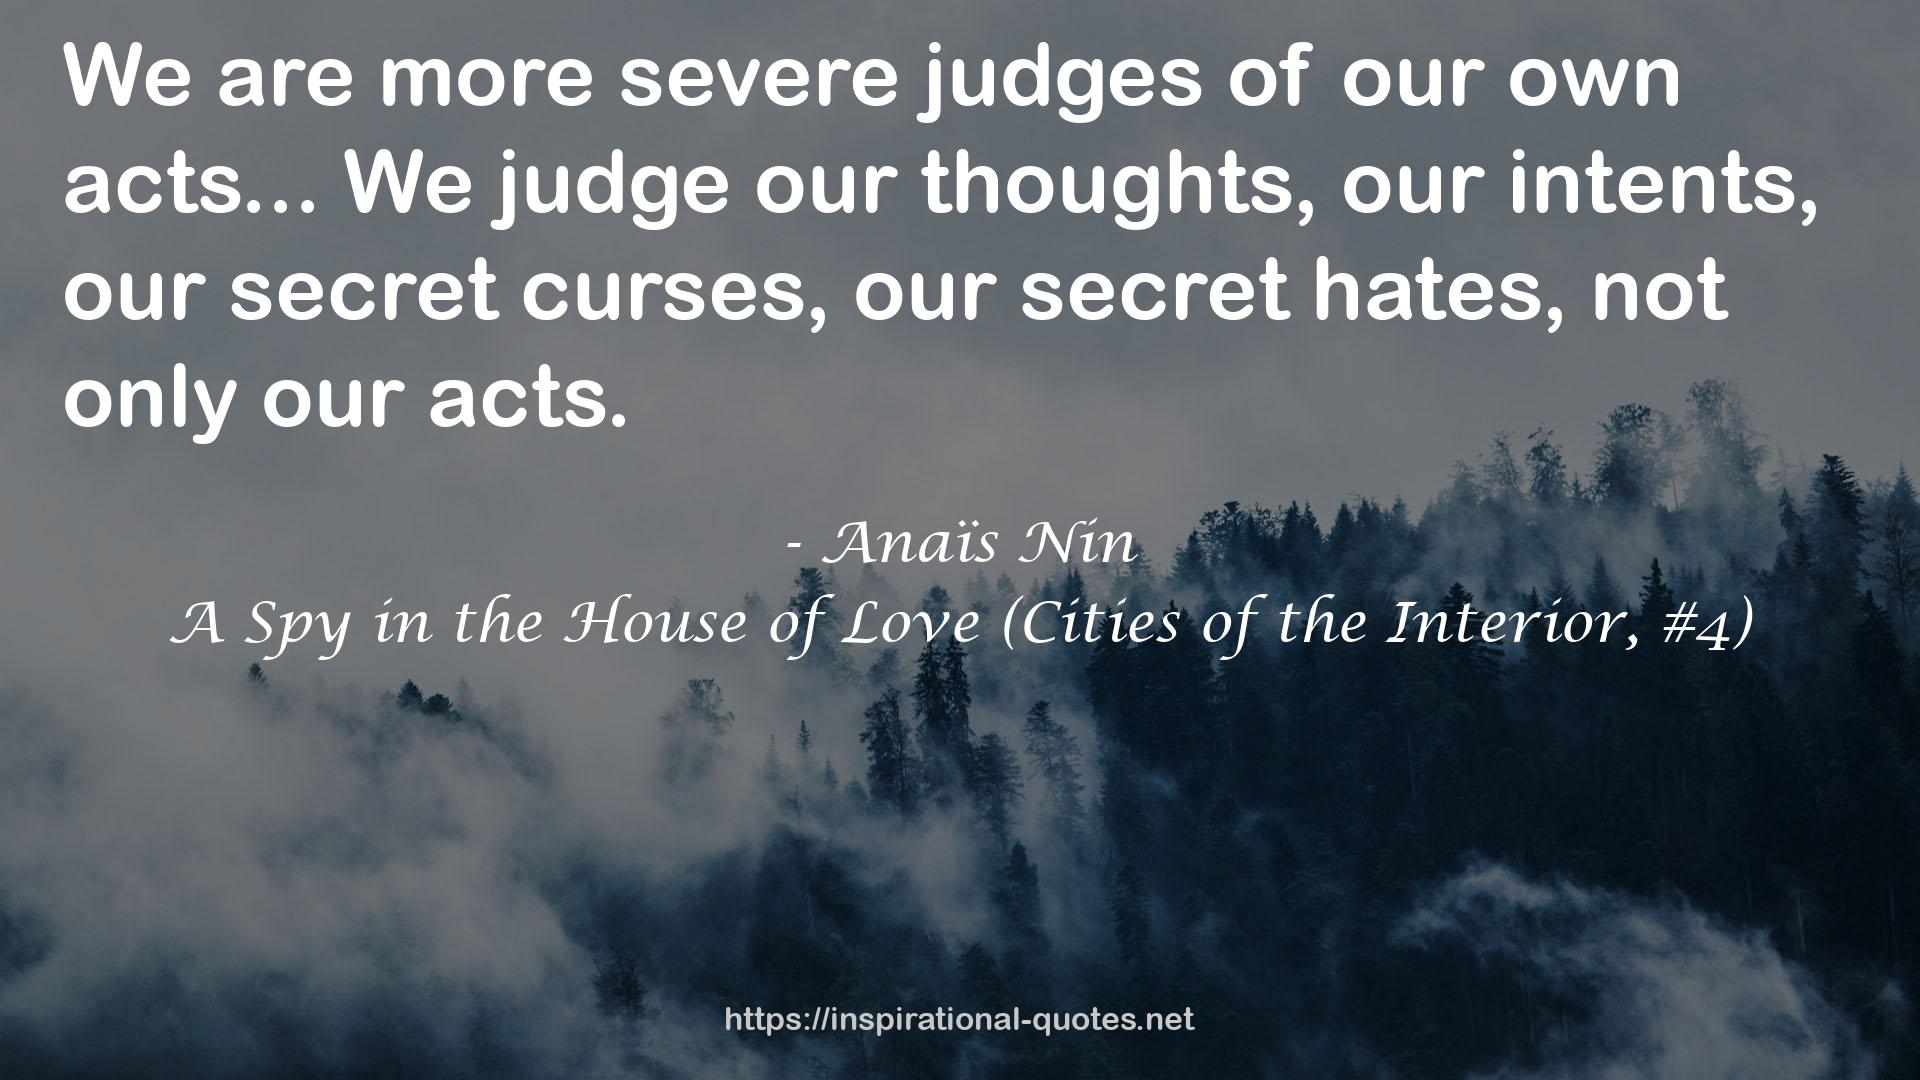 A Spy in the House of Love (Cities of the Interior, #4) QUOTES